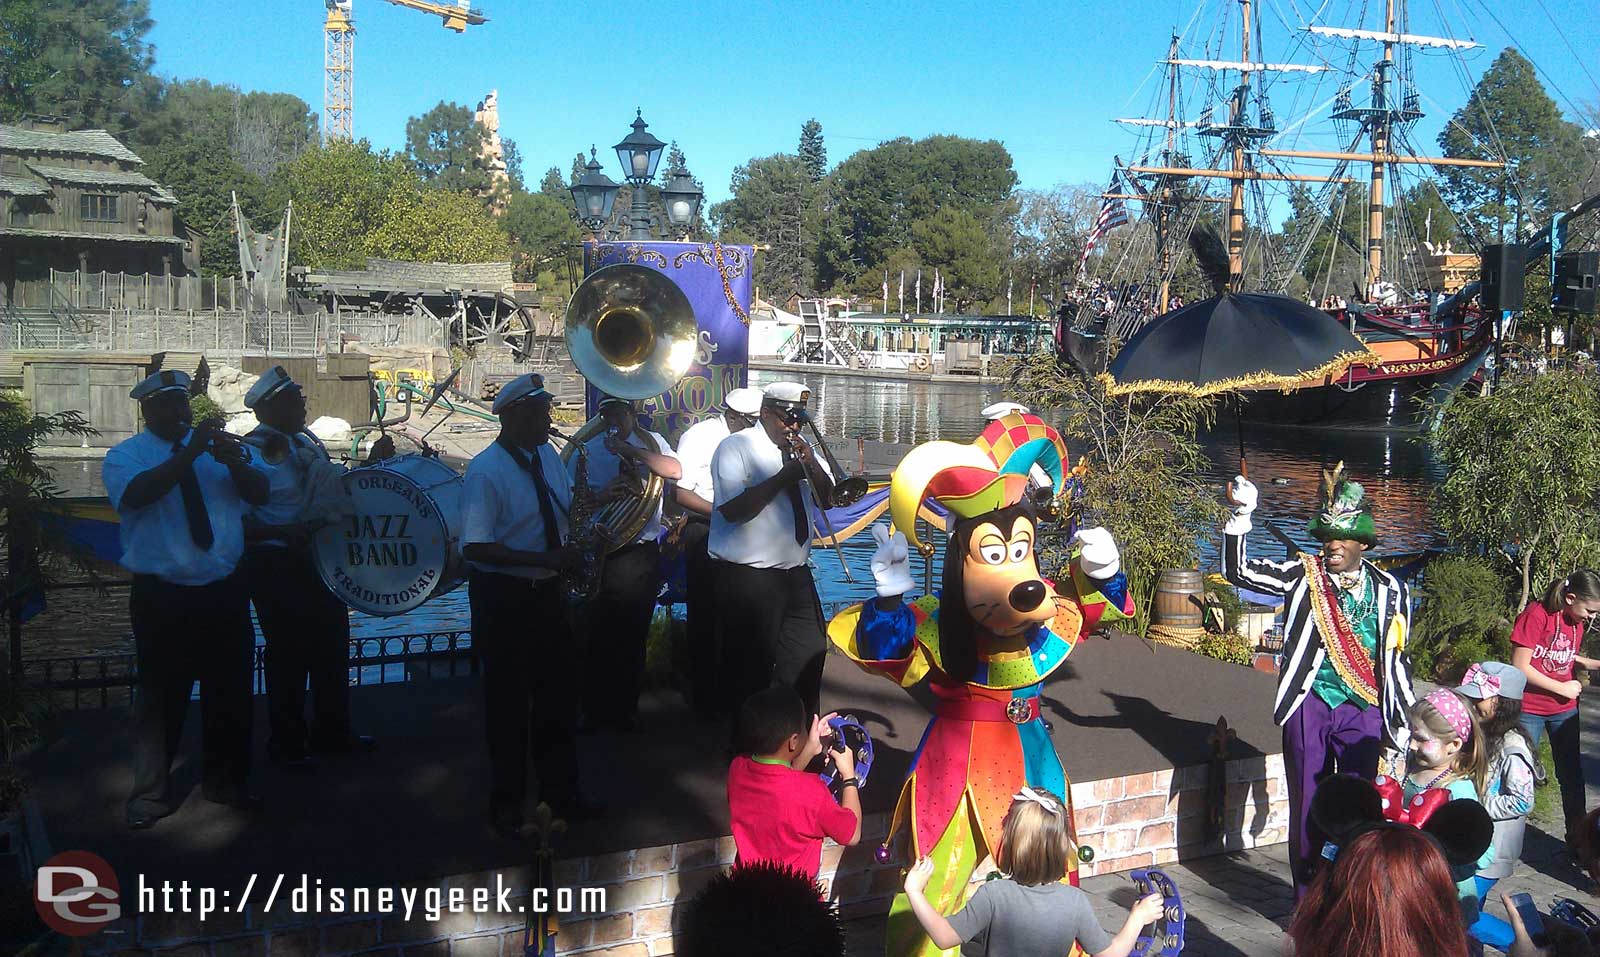 The traditional jazz band plus Goofy performing along the Rivers of America LimitedTimeMagic